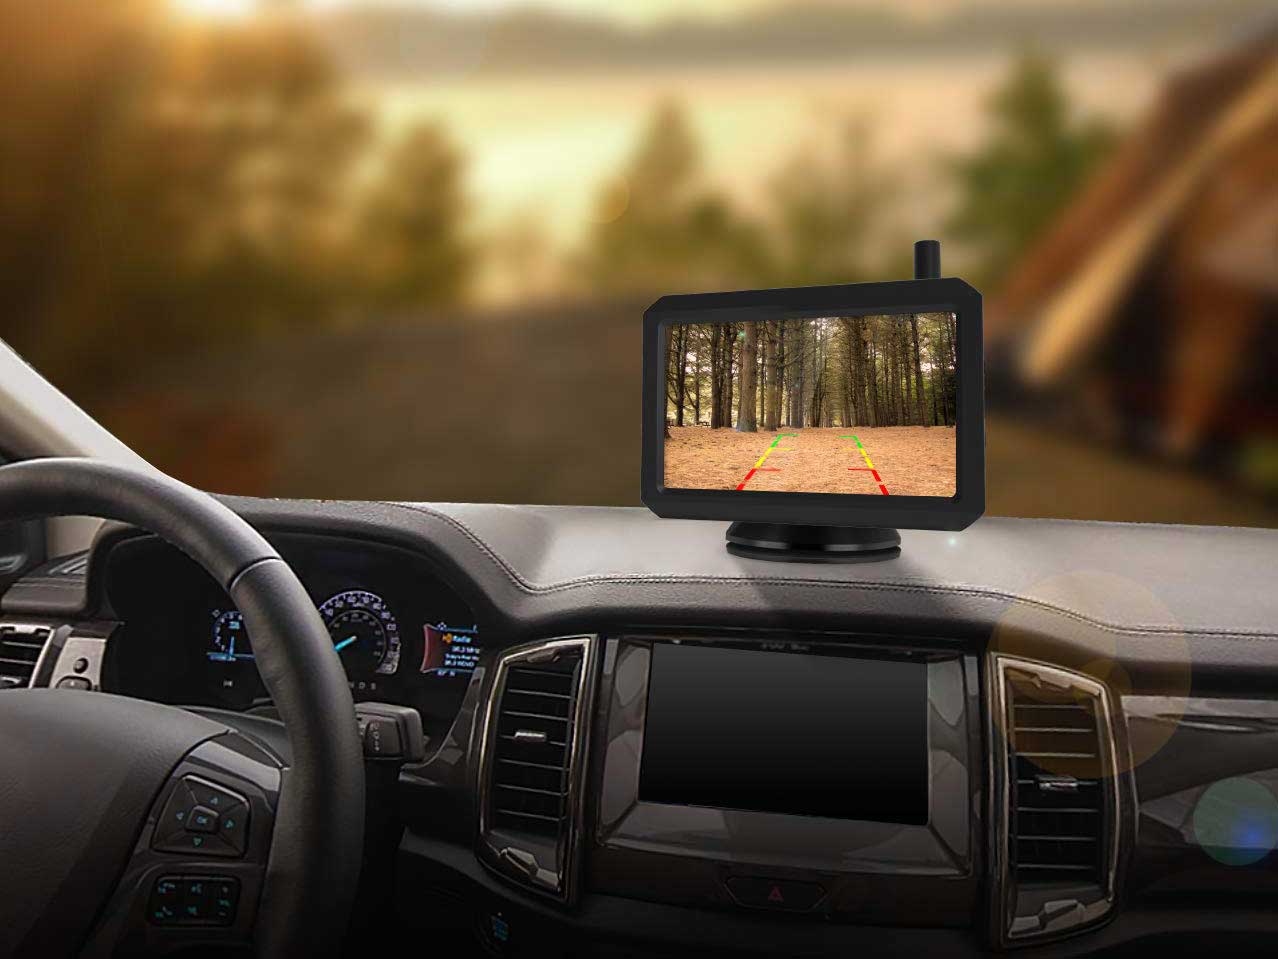 A backup camera’s core function is to reassure you there’s nothing behind you when backing up.